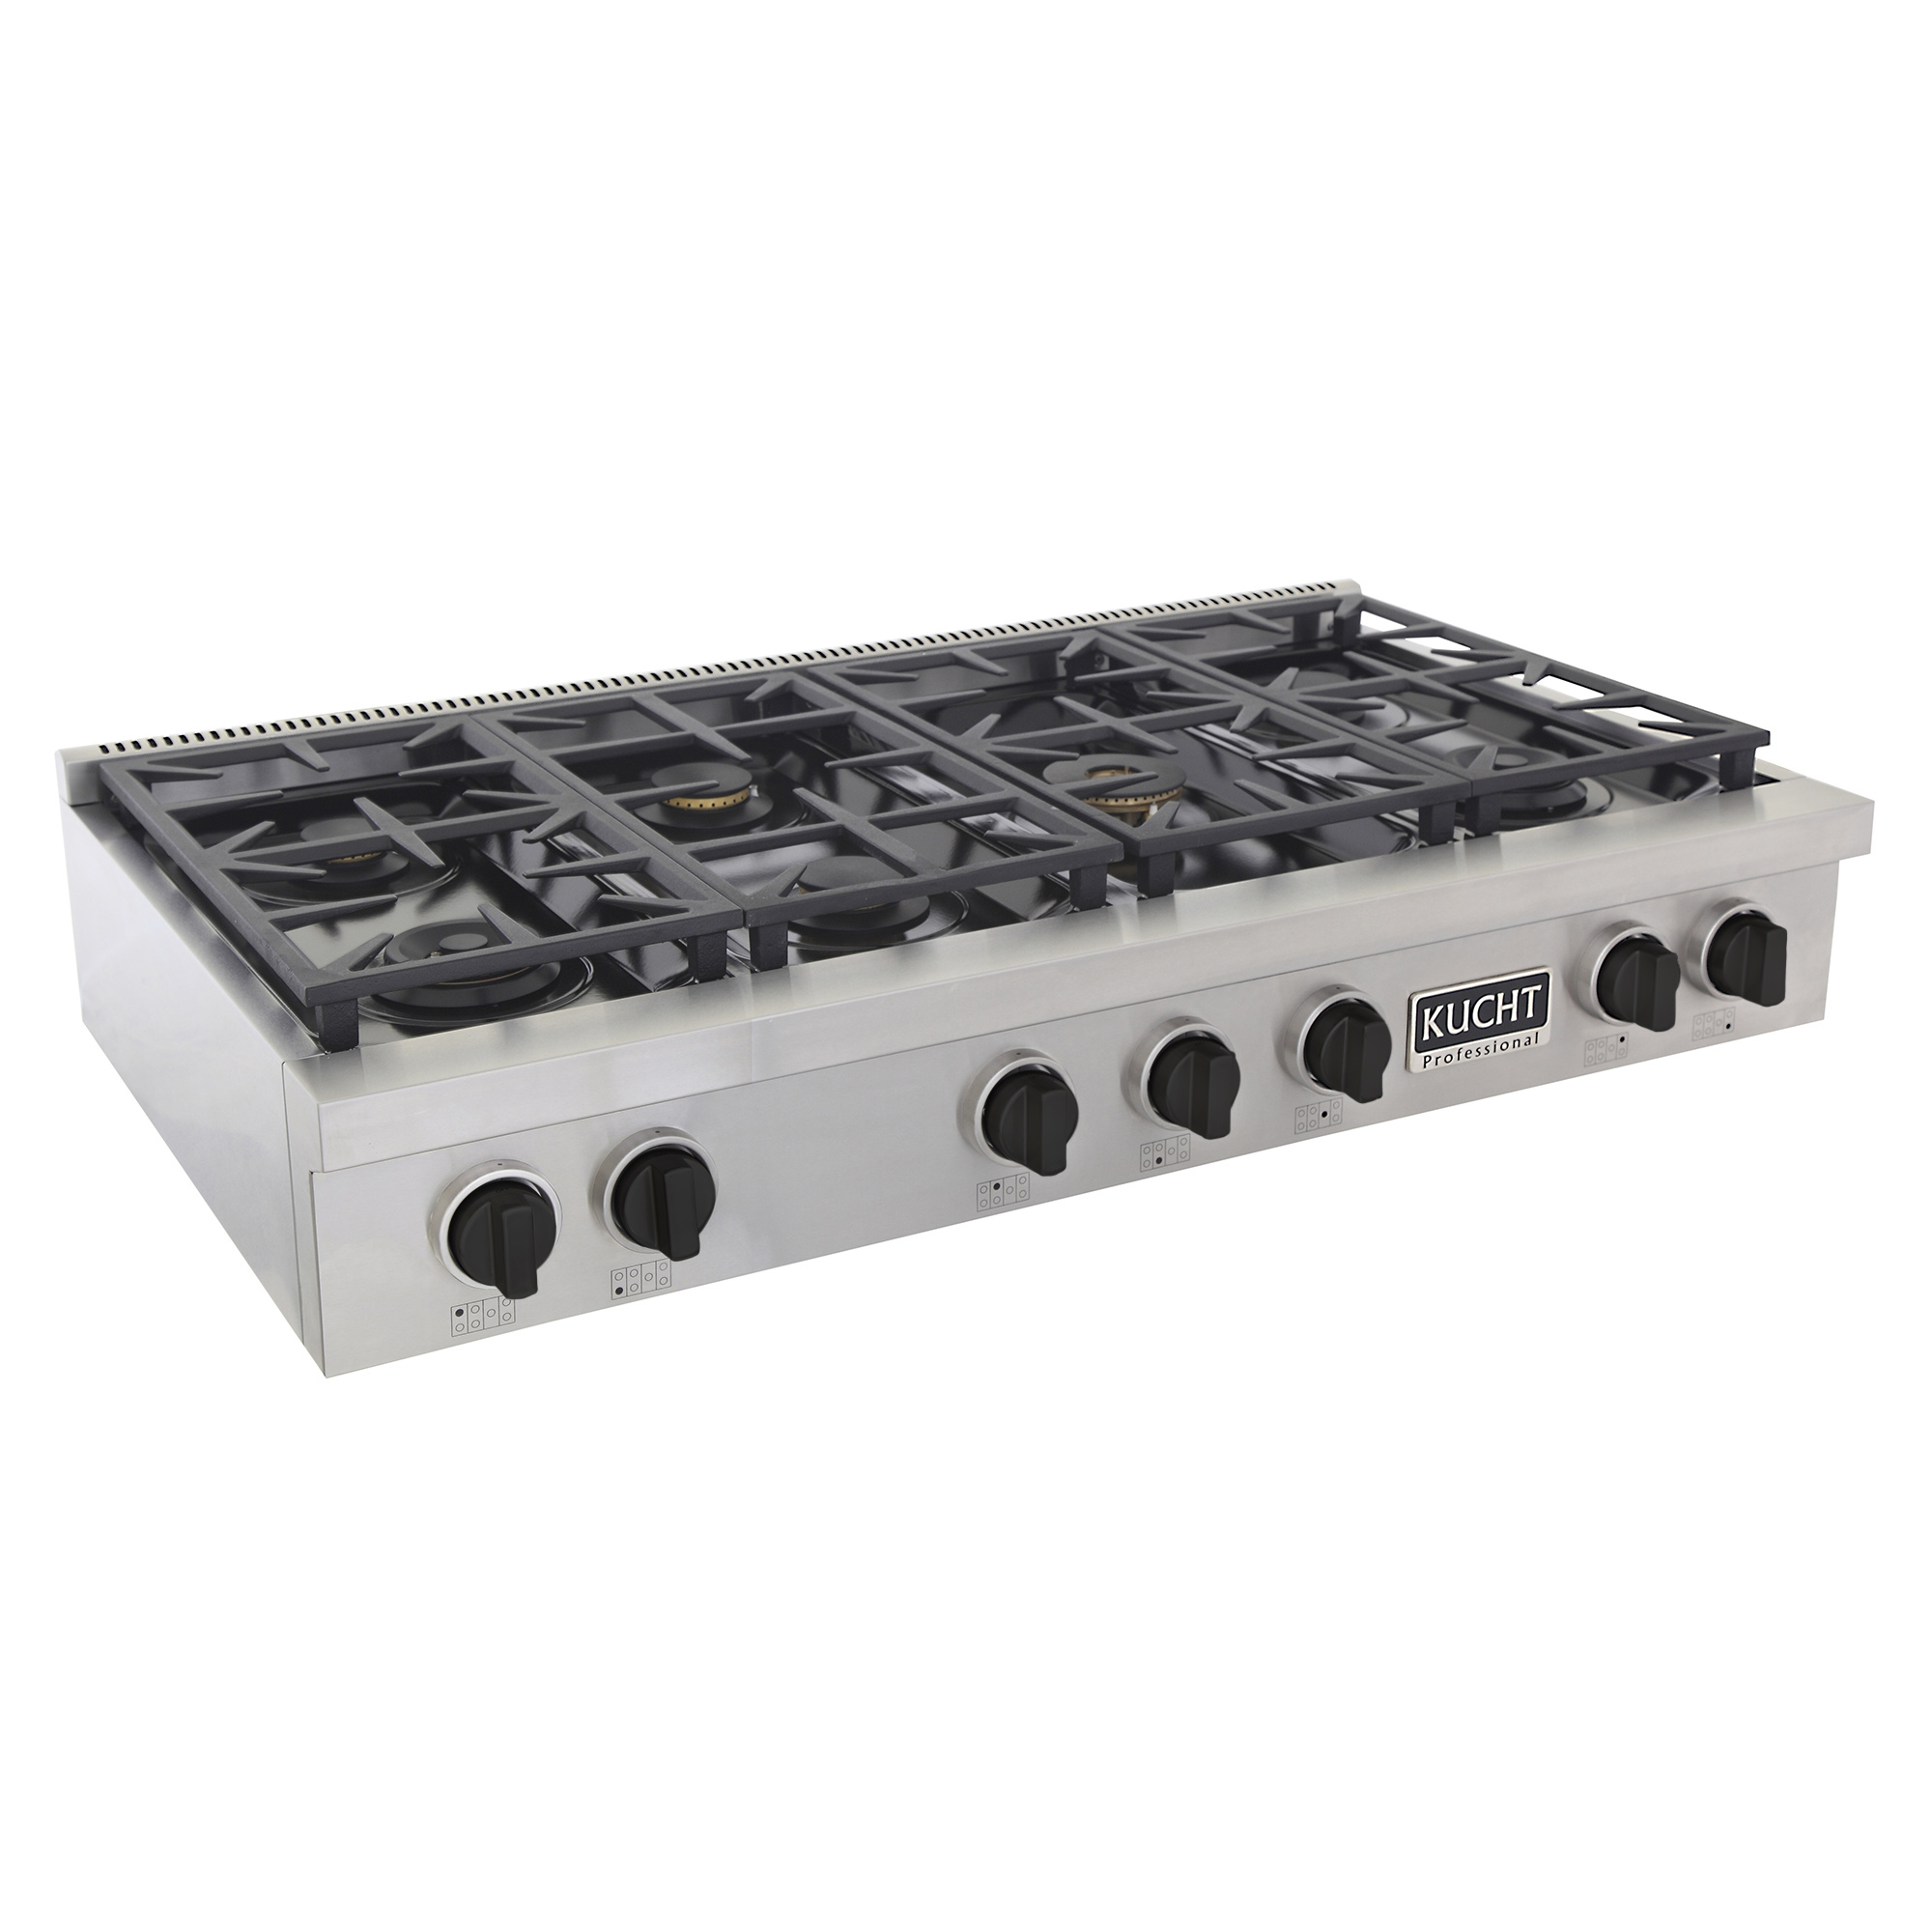 KUCHT Professional 48 in. Natural Gas Range Top with Sealed Burners, in Stainless Steel with Tuxedo Black Knobs